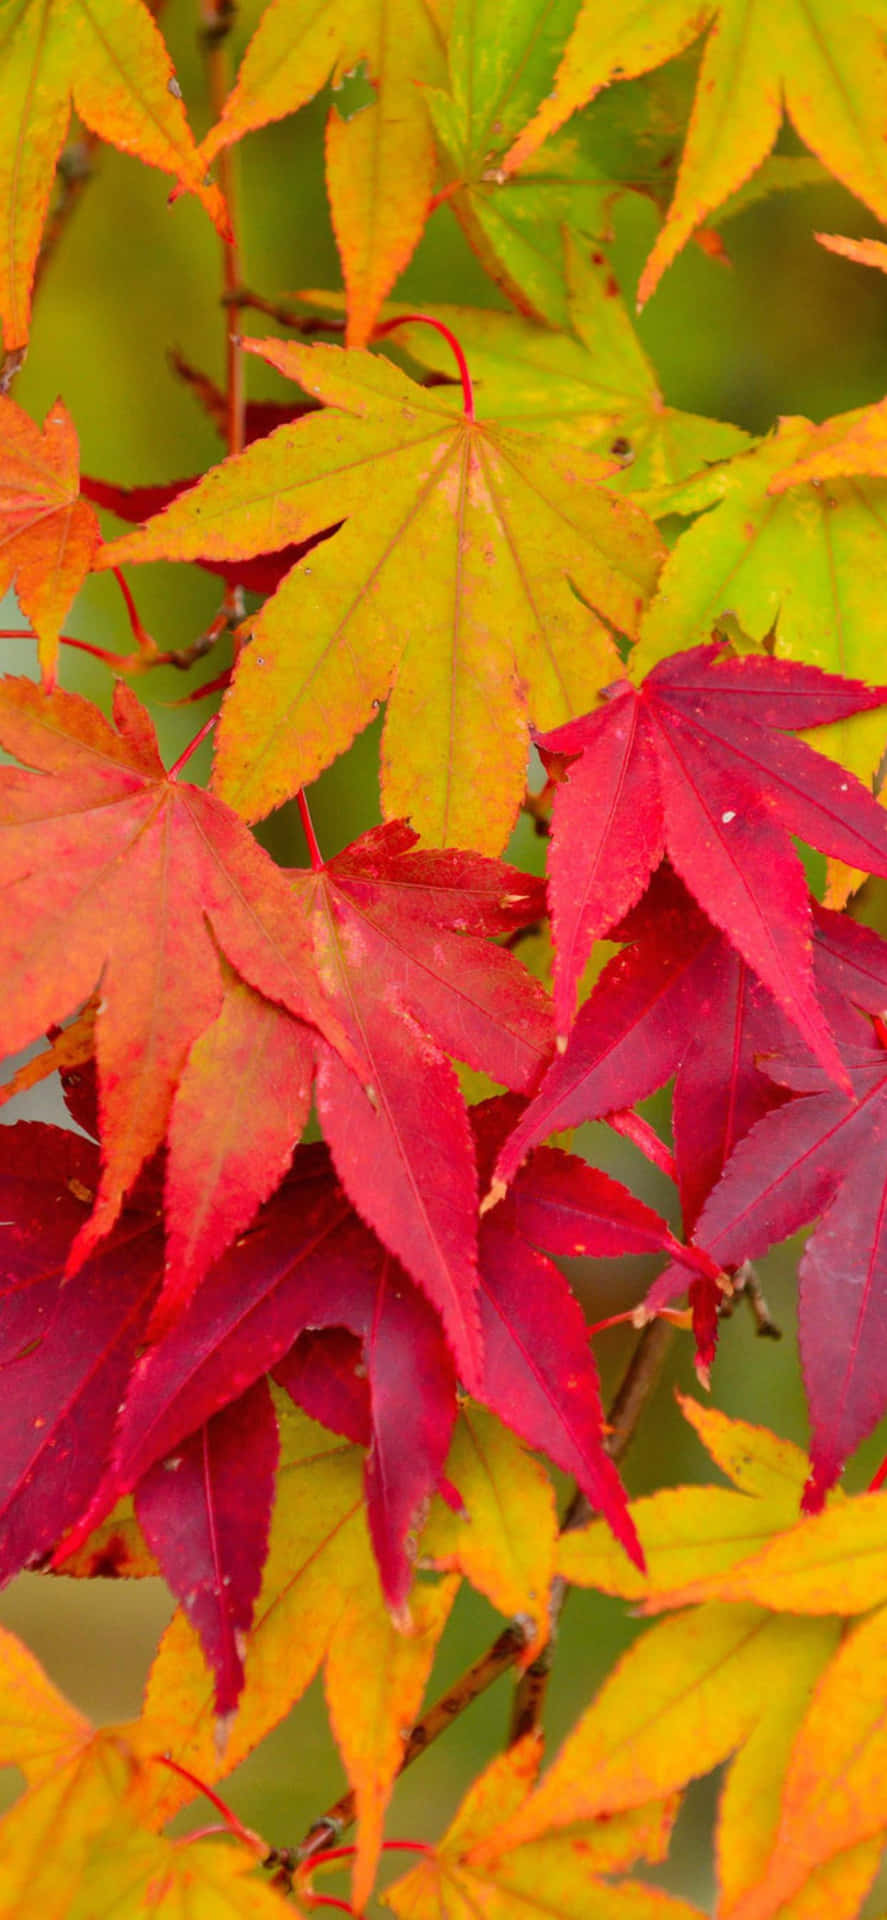 Fall brings beautiful transformation of leaves and colors to nature.